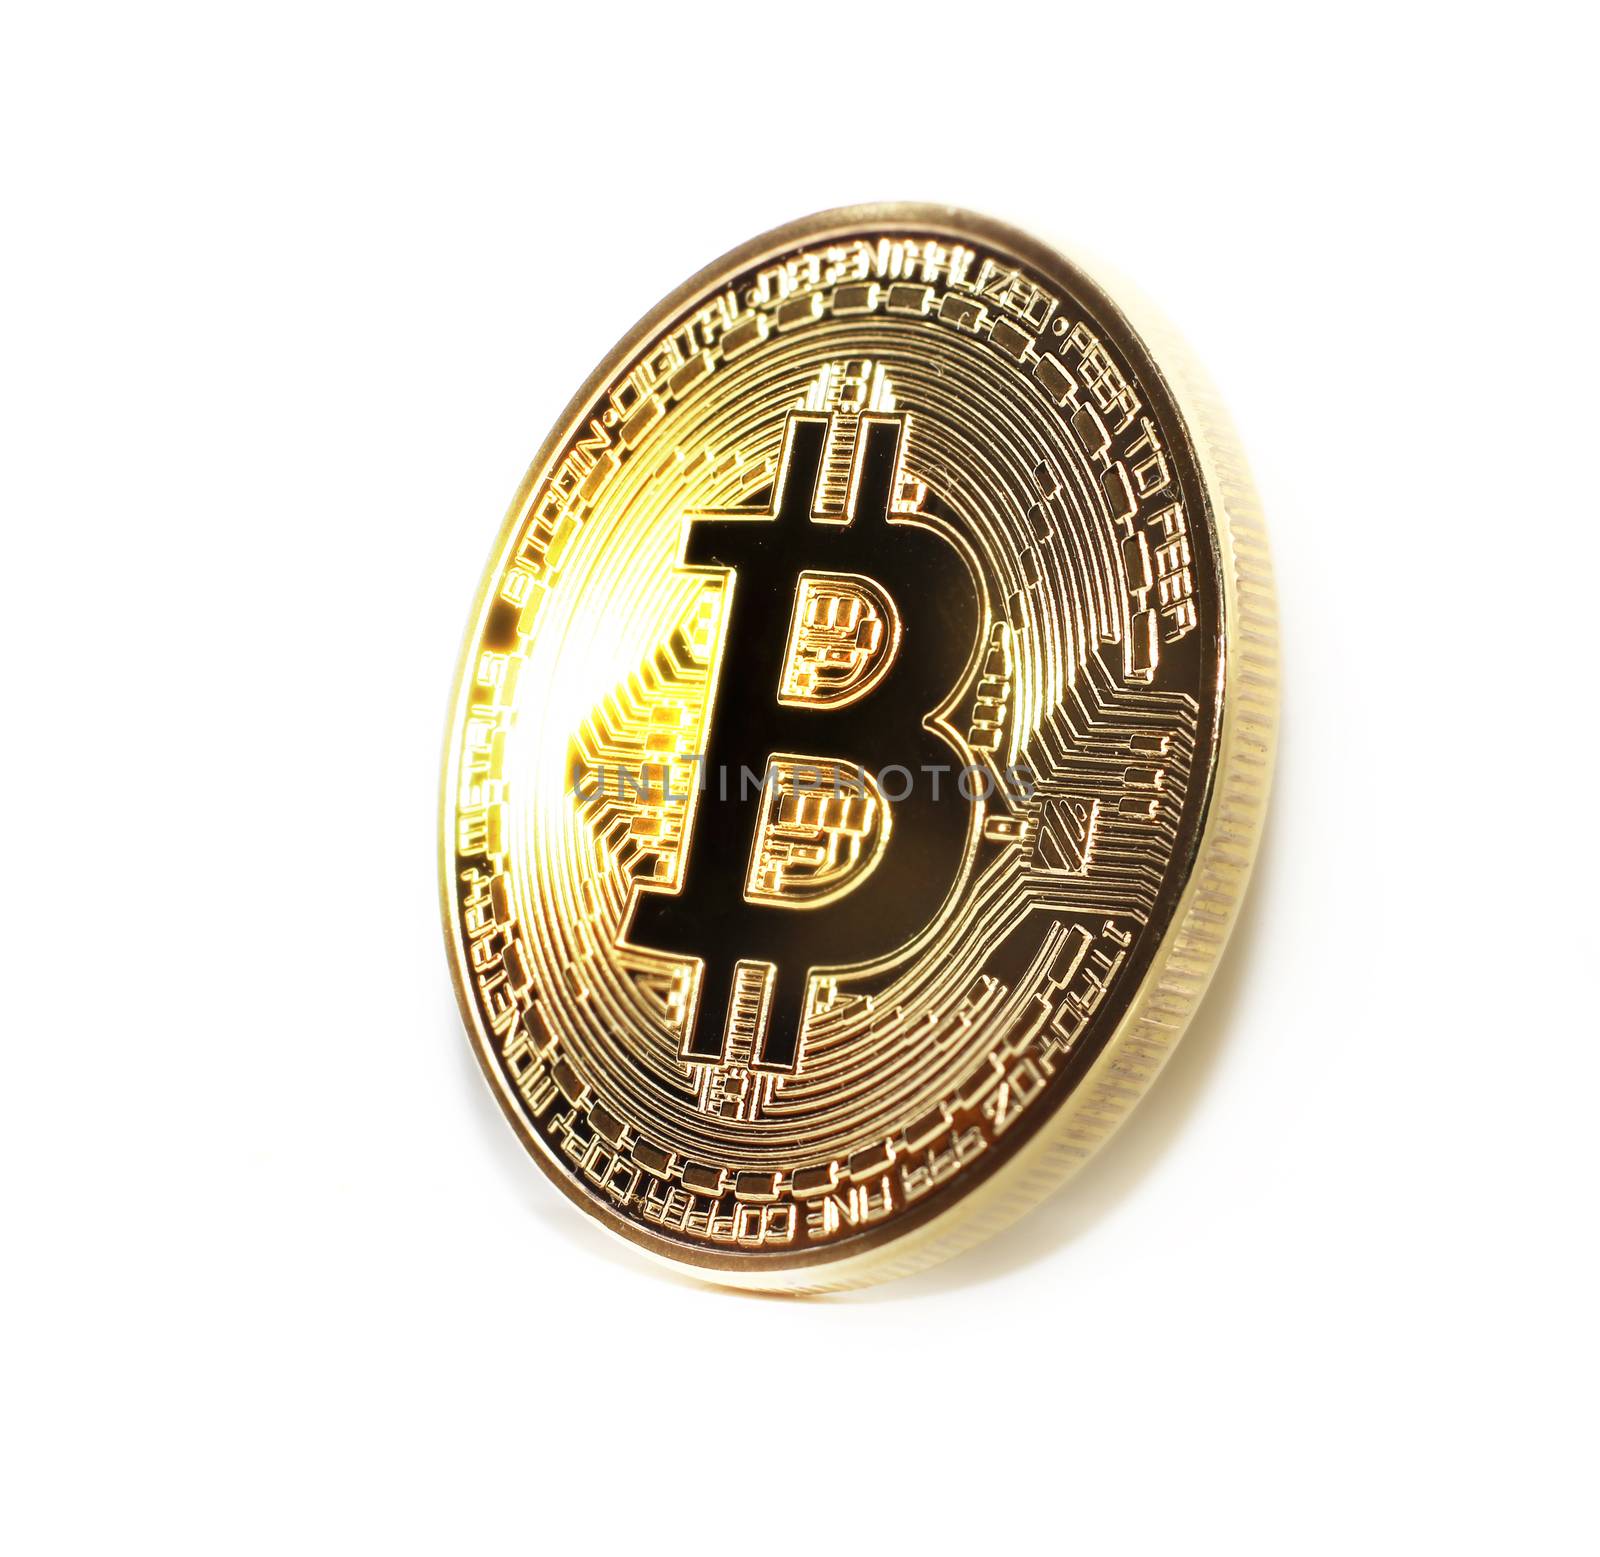 Bitcoin coin photo close-up. Crypto currency, blockchain technology by sermax55